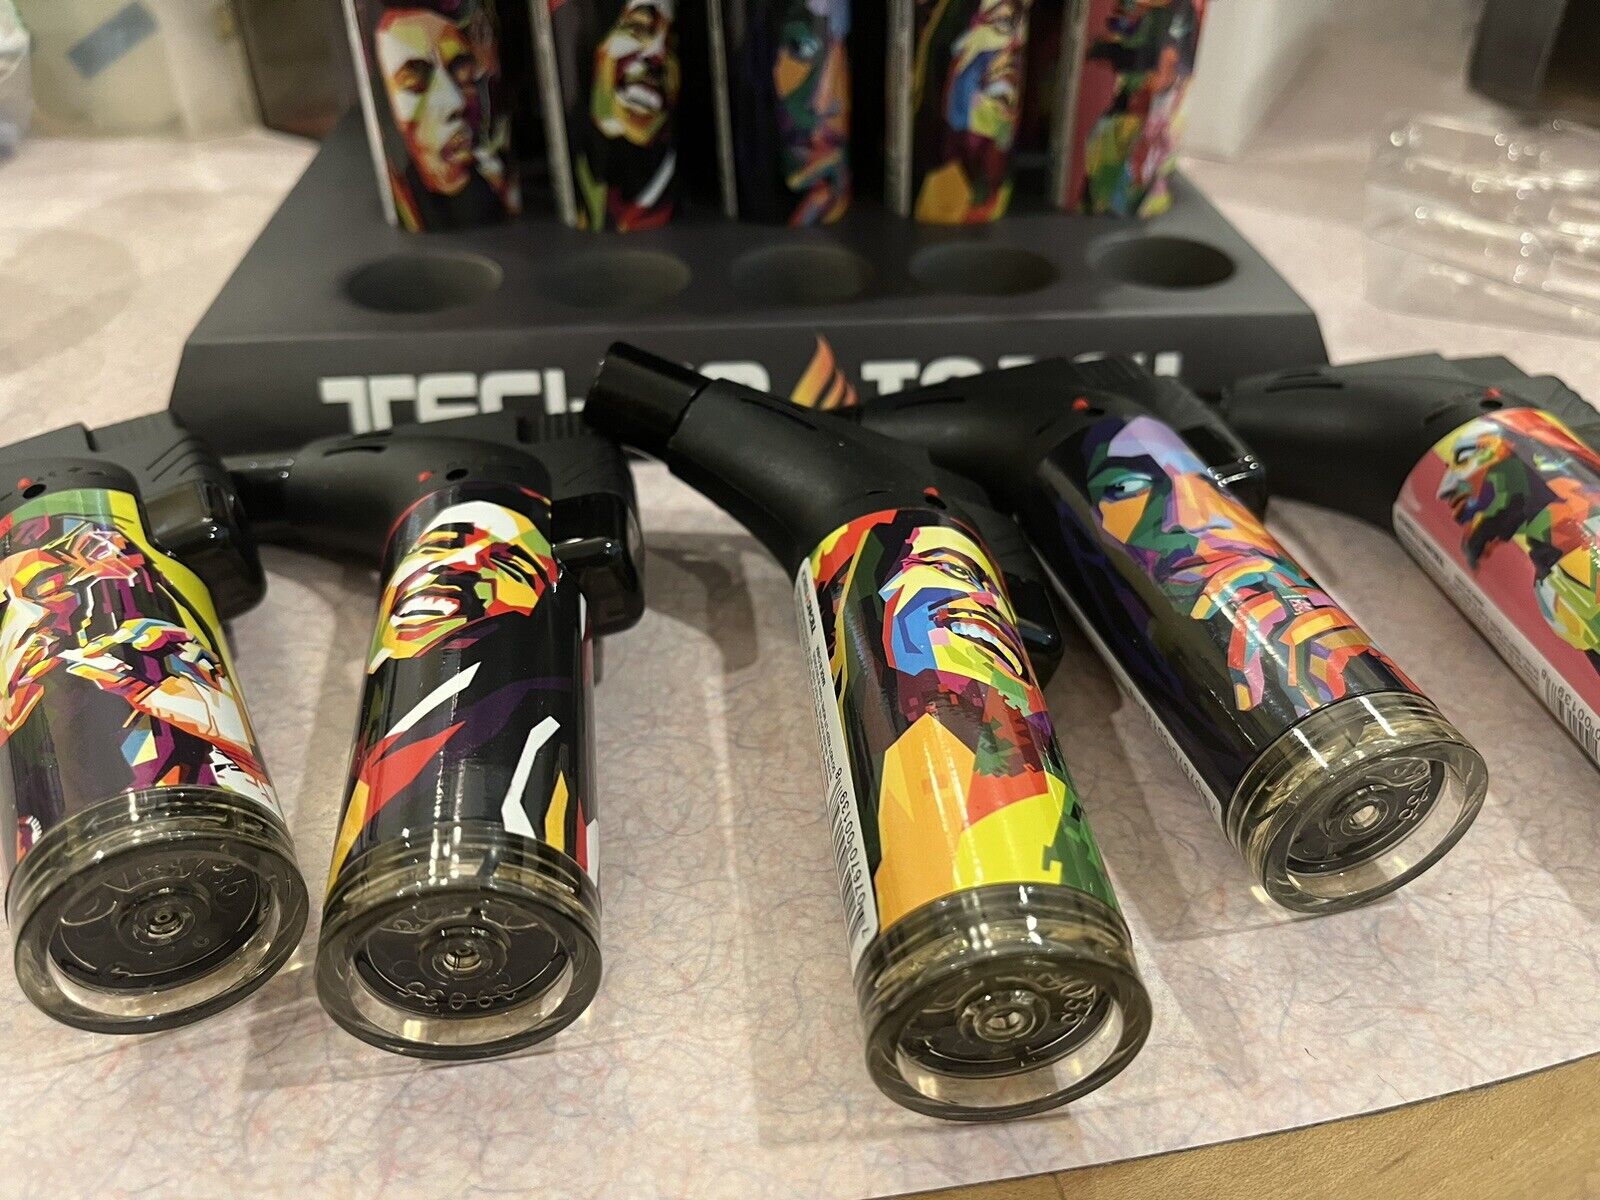 Techno torch lighter Full-size Torch Adjustable Flame Bob Marley Desig Lot Of 15